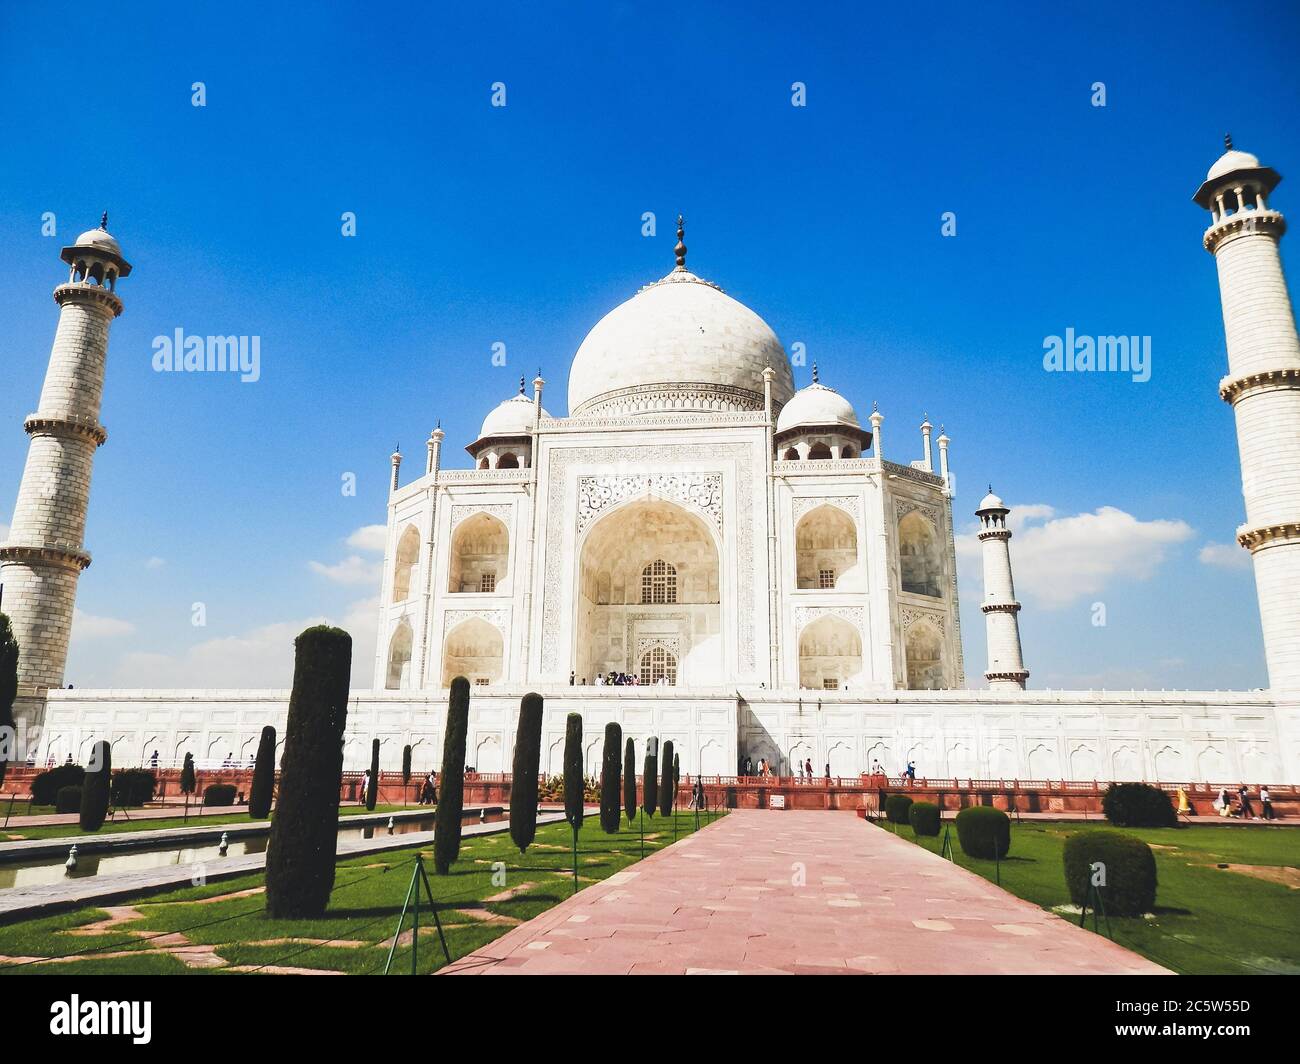 Taj Mahal, Agra, Uttar Pradesh, northern India. One of the New Seven Wonders of the World and one of India's most visited UNESCO world heritage sites. Stock Photo